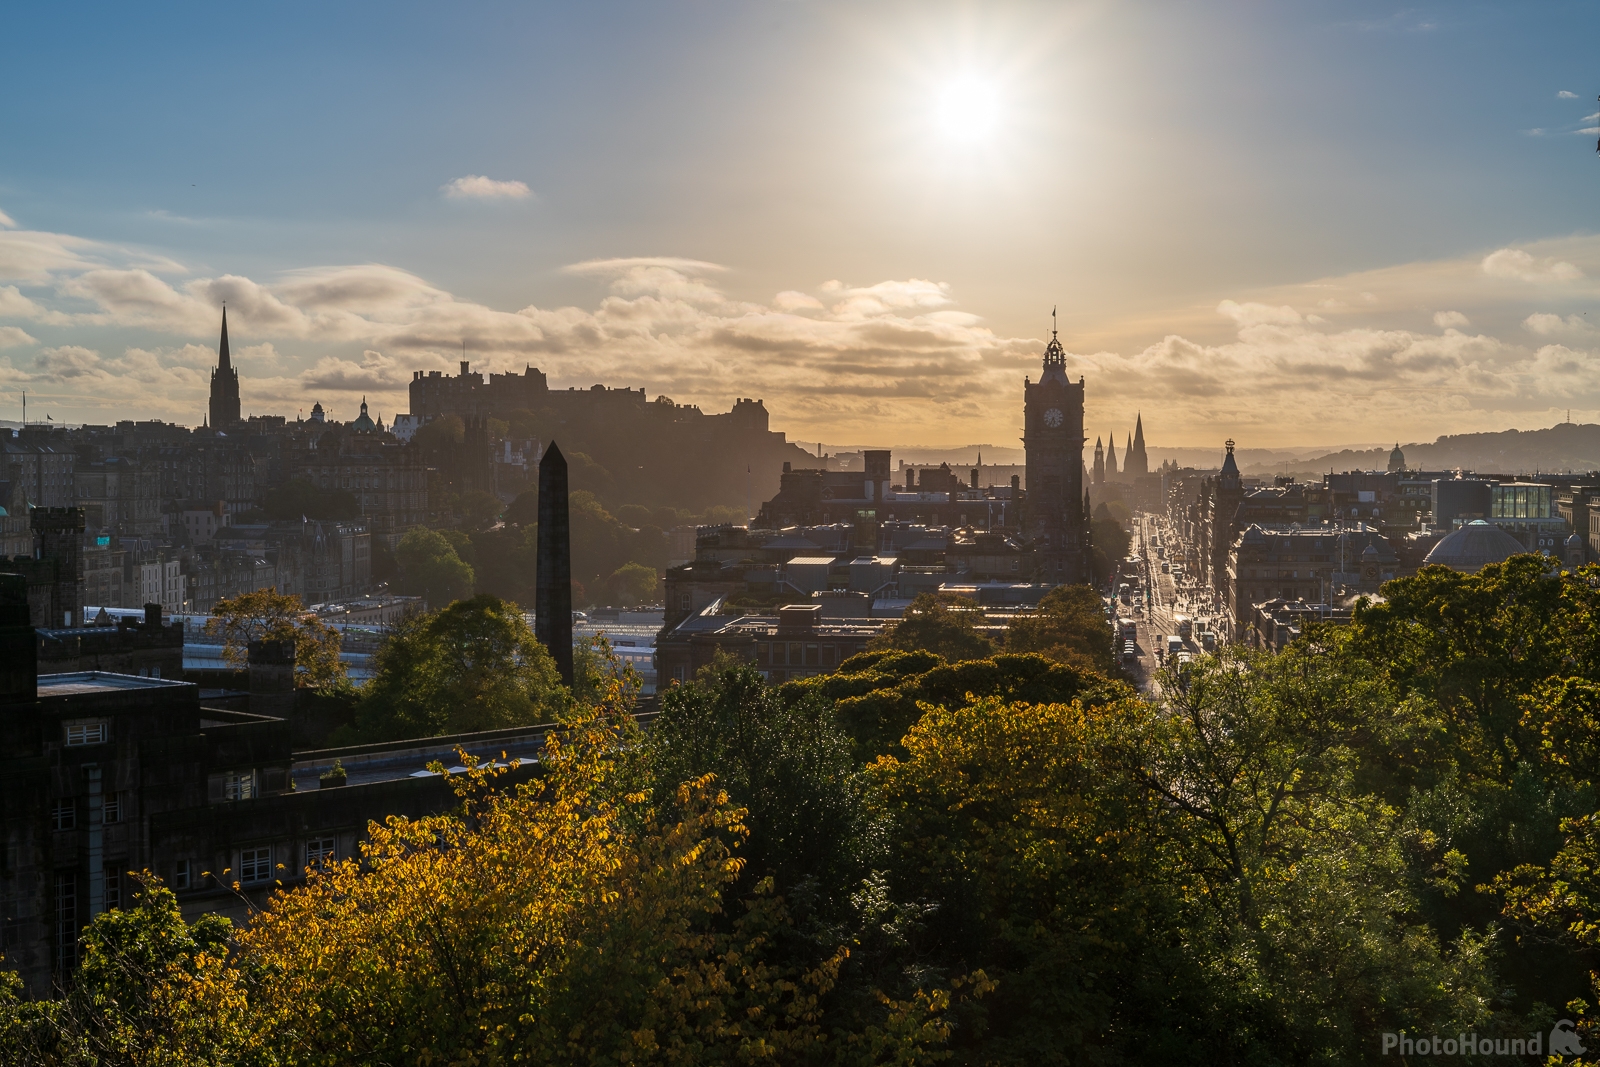 Image of Calton Hill by James Billings.